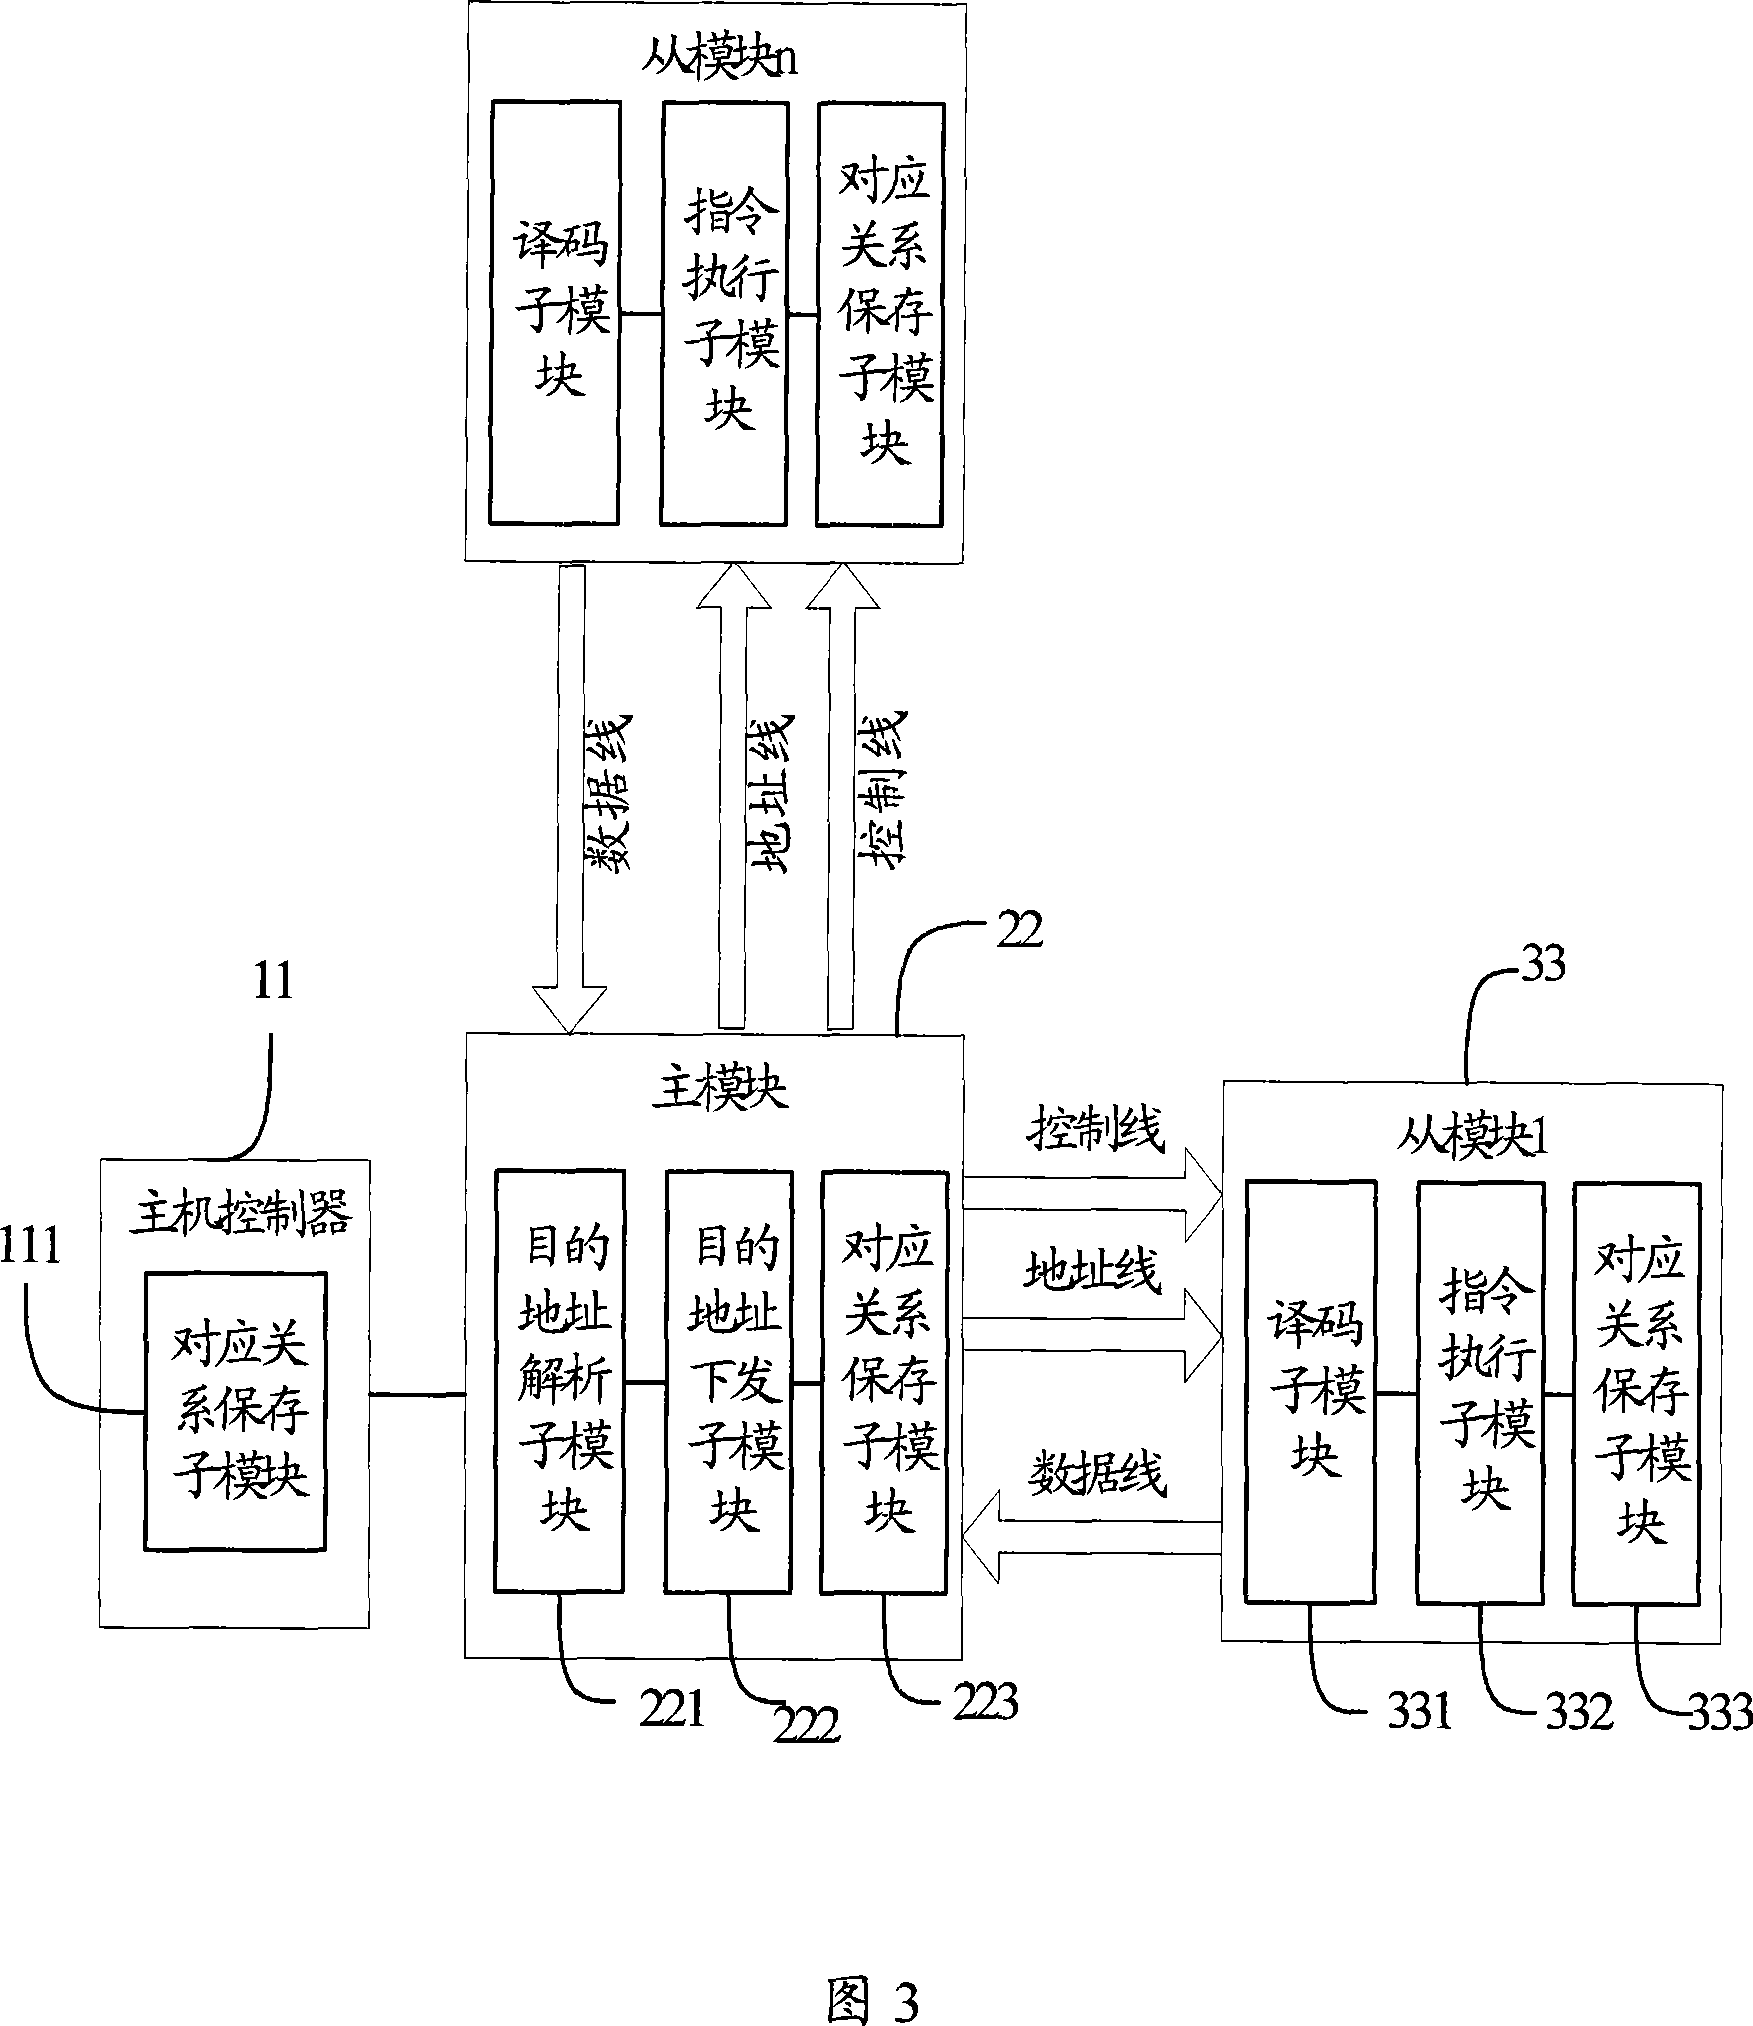 Control method and device between master-salve module